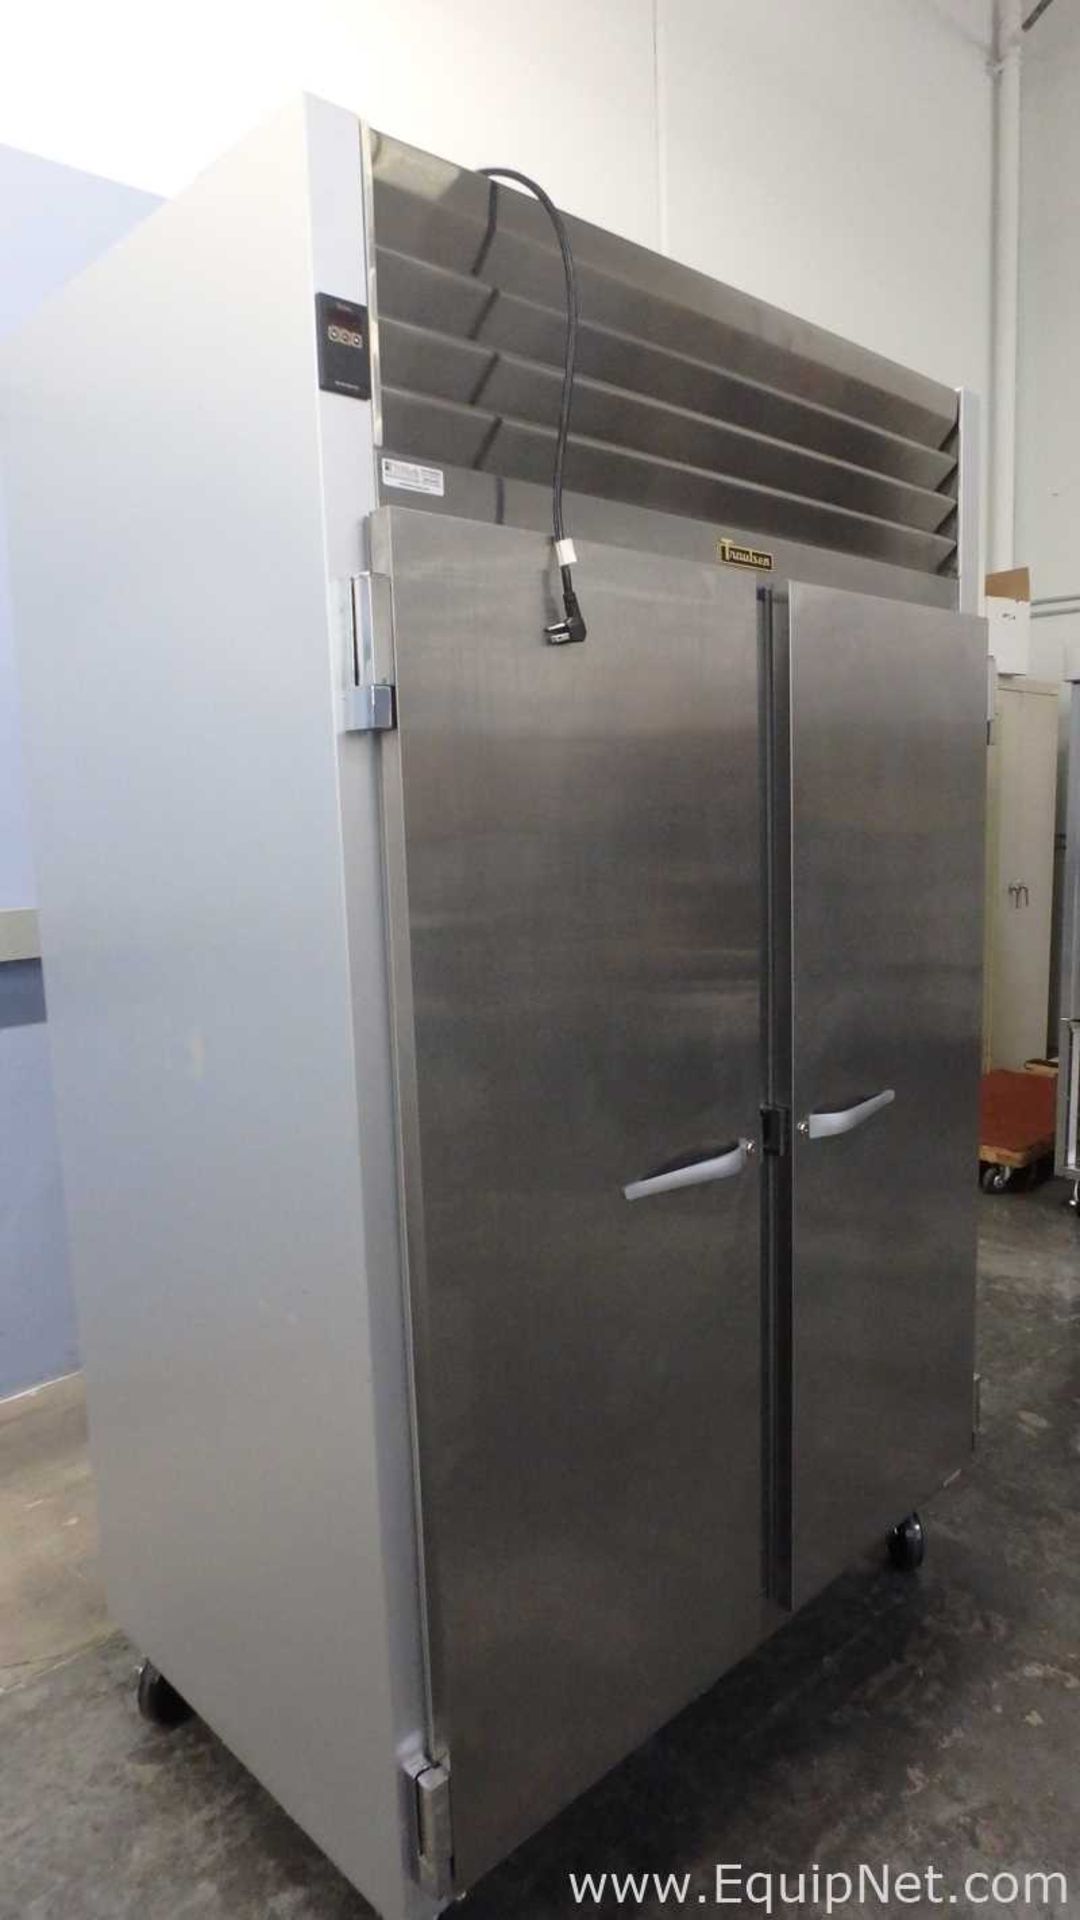 Traulsen G20010 52in 2-Section Solid Door Reach-In Refrigerator Left-Right Hinged Doors 46cuft - Image 9 of 12